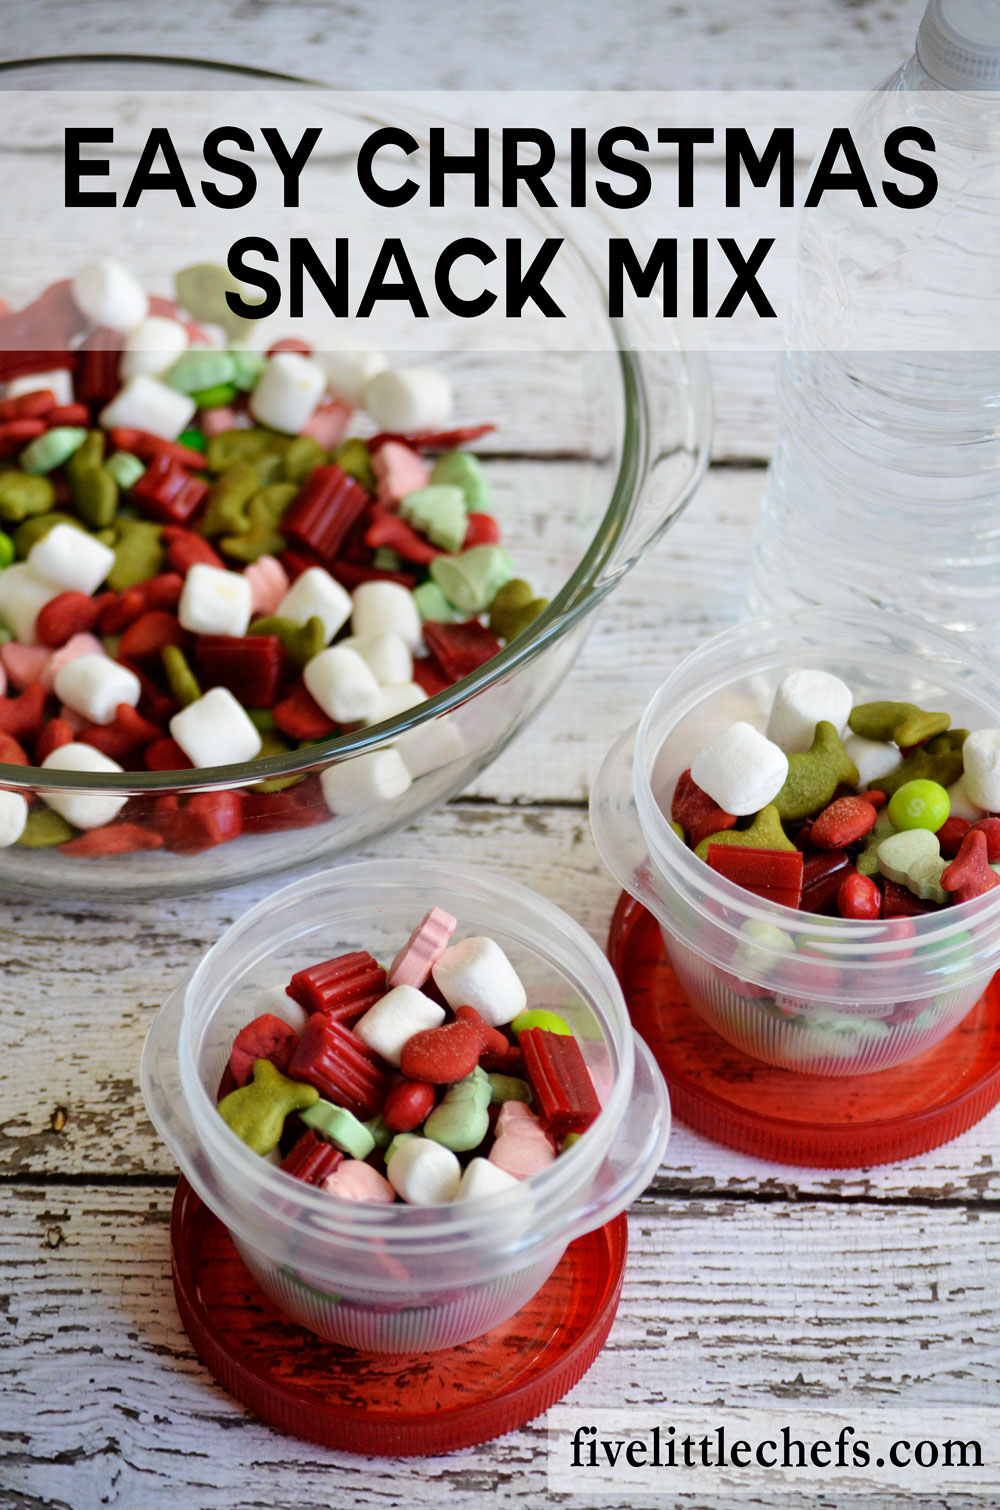 This Christmas Snack Mix is so simple. Just open a few packages and mix it all together.